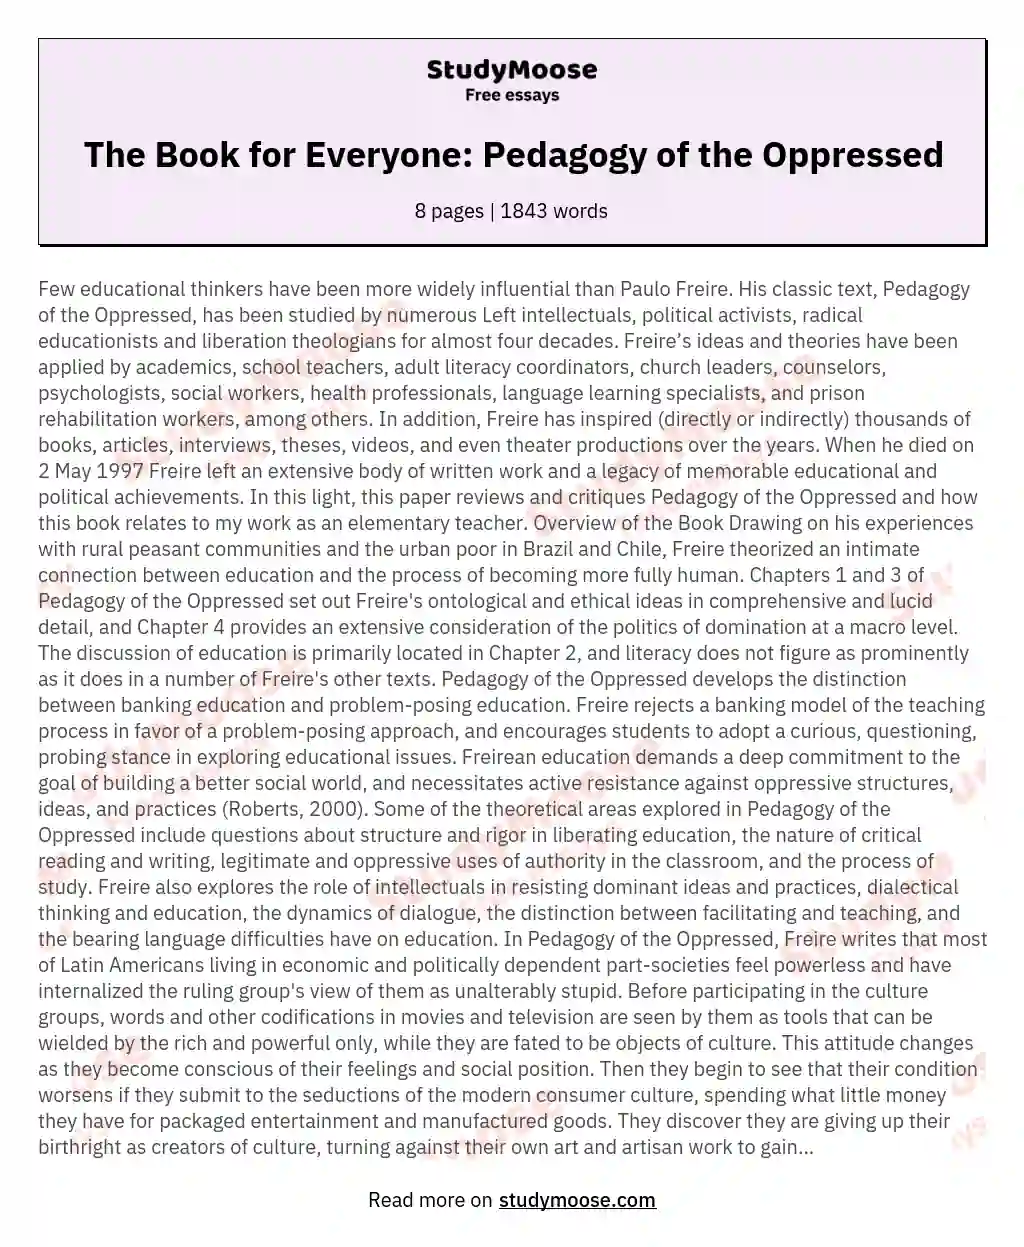 The Book for Everyone: Pedagogy of the Oppressed